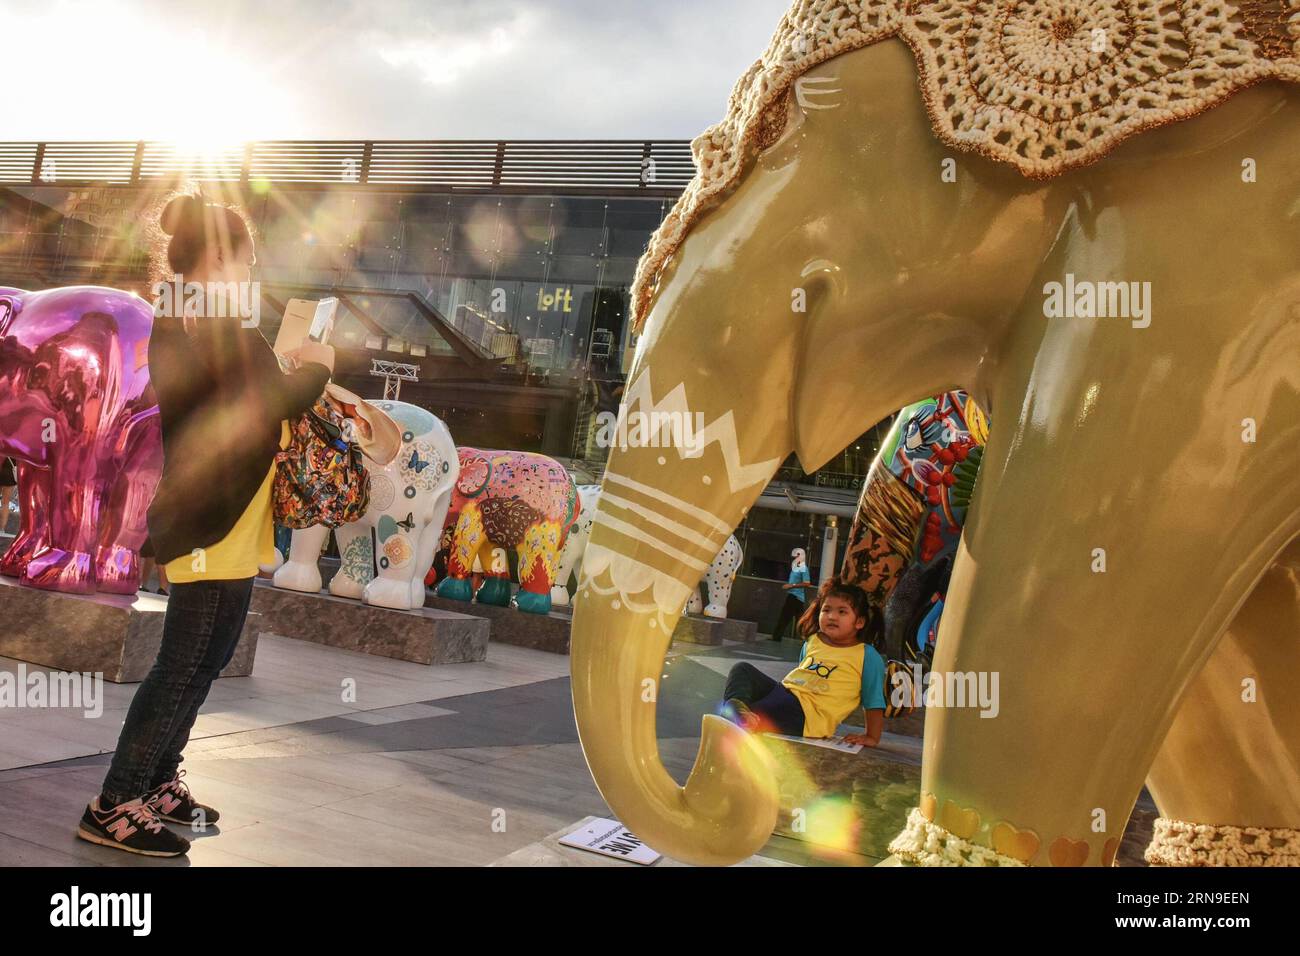 (151201) -- BANGKOK, Dec. 1, 2015 -- A woman takes photos for her child during the Elephant Parade Bangkok 2015 open-air exhibition in downtown Bangkok, capital of Thailand, on Dec. 1, 2015. Eighty-eight colored elephant statues created by various artists and celebrities were put on the show in Bangkok on Monday. Organized by Elephant Parade, a social enterprise, Elephant Parade Bangkok 2015 aims to raise awareness for the conservation and welfare of Asian elephants, an endangered species. All the elephant statues will be auctioned off and the proceeds will go to the Golden Triangle Asian Elep Stock Photo